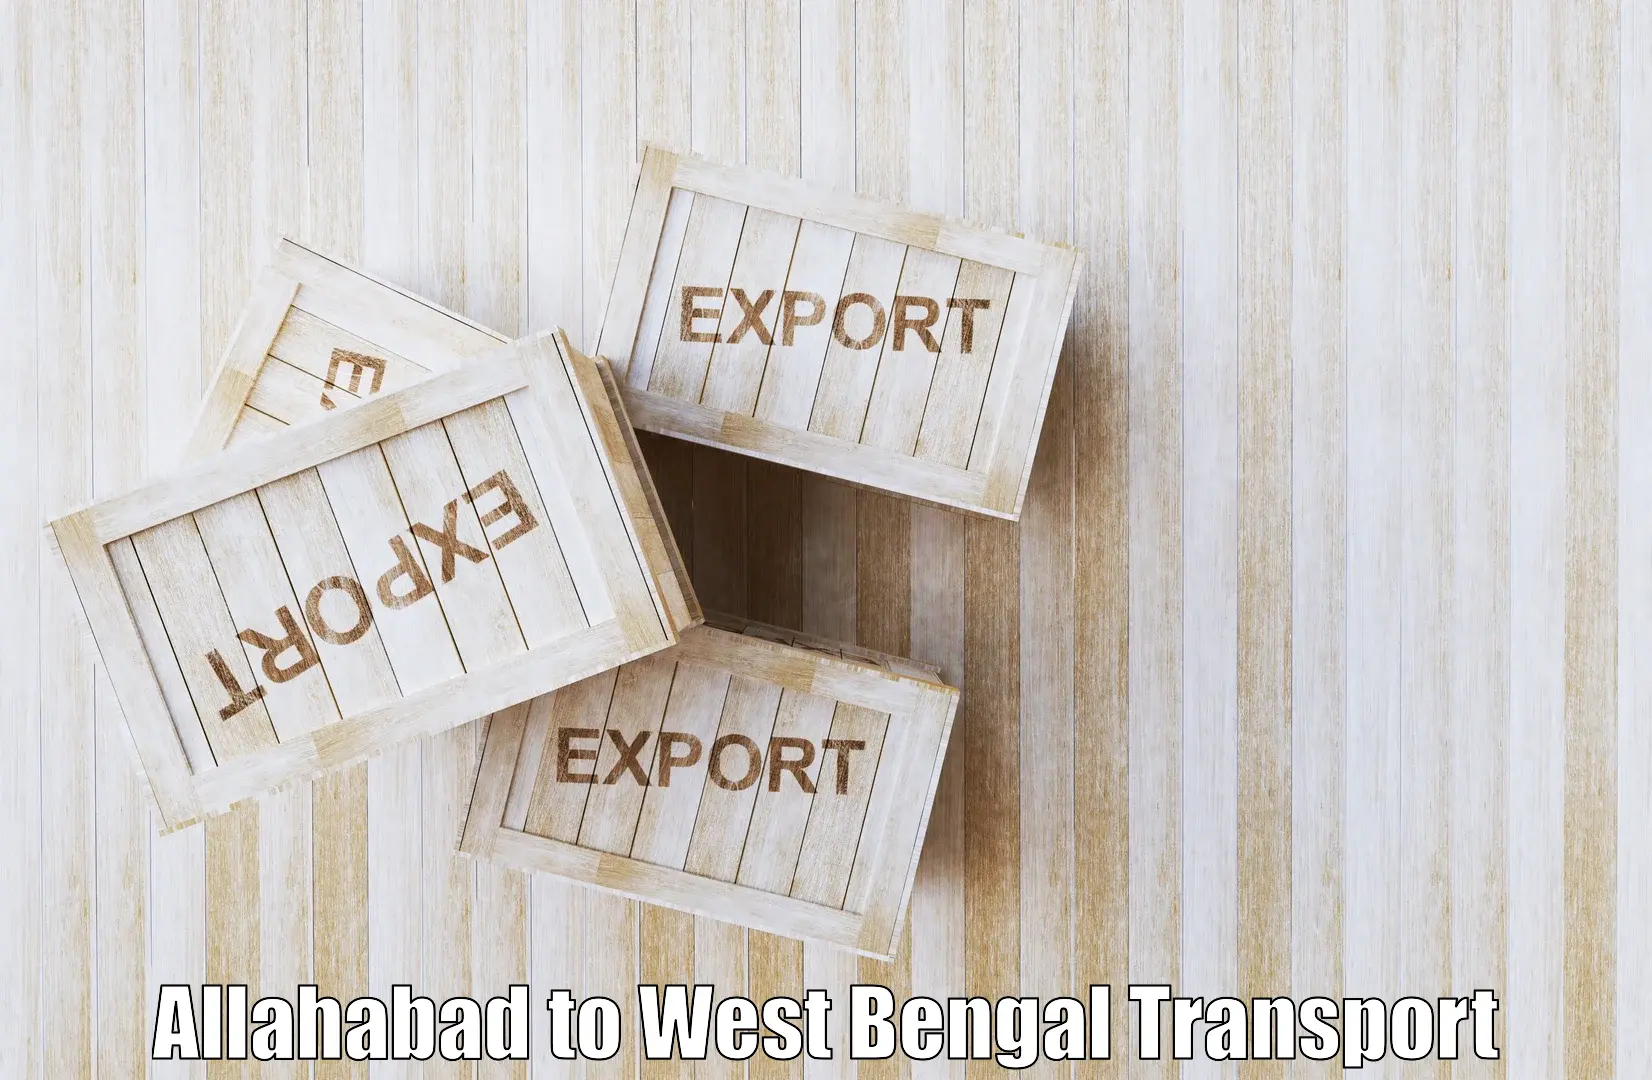 Shipping partner Allahabad to Hooghly